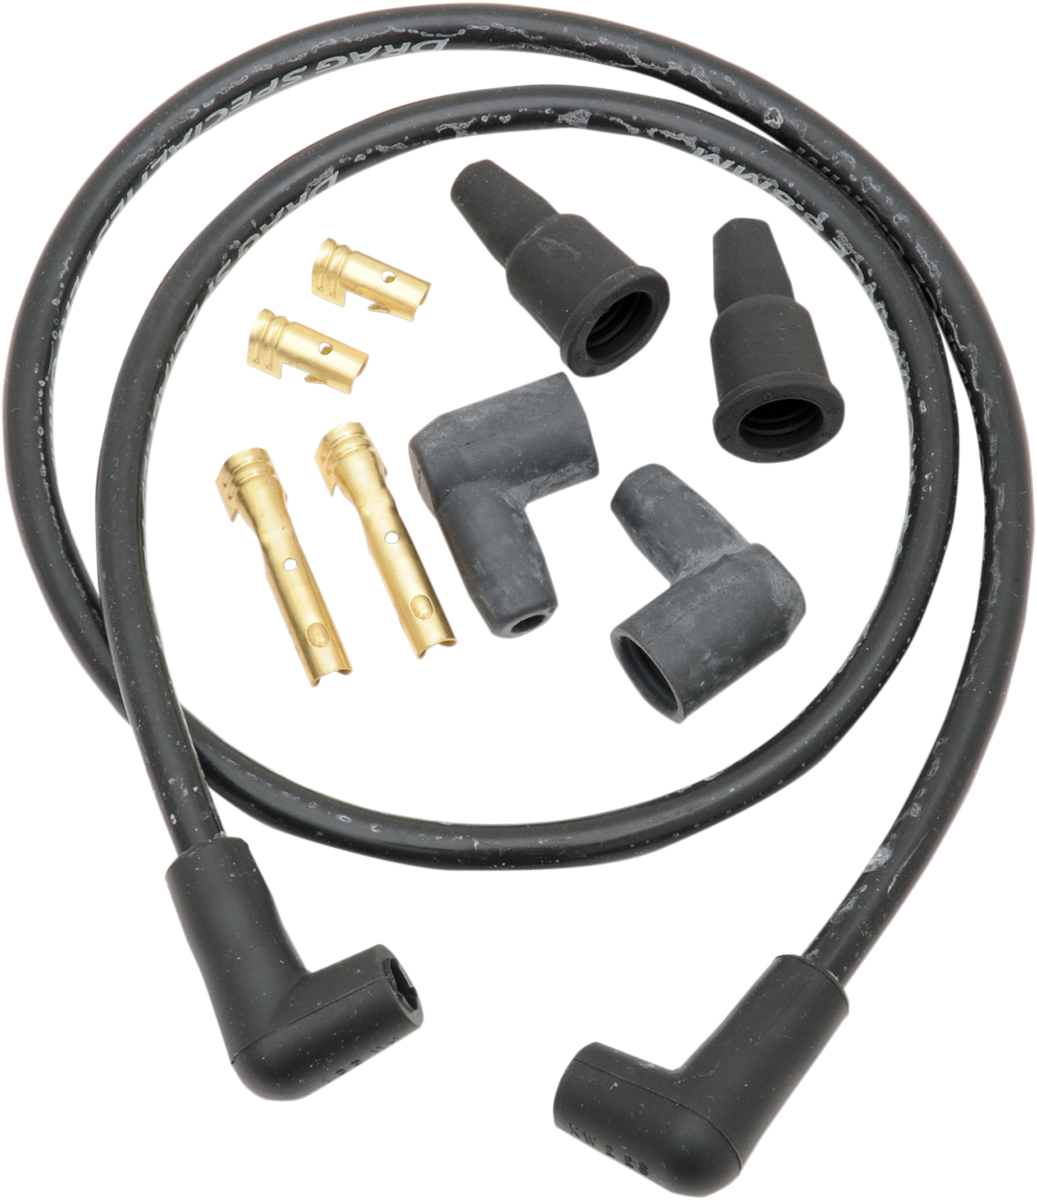 2104-0139 - DRAG SPECIALTIES 8.8 mm Plug Wires - Universal SPW4-DS